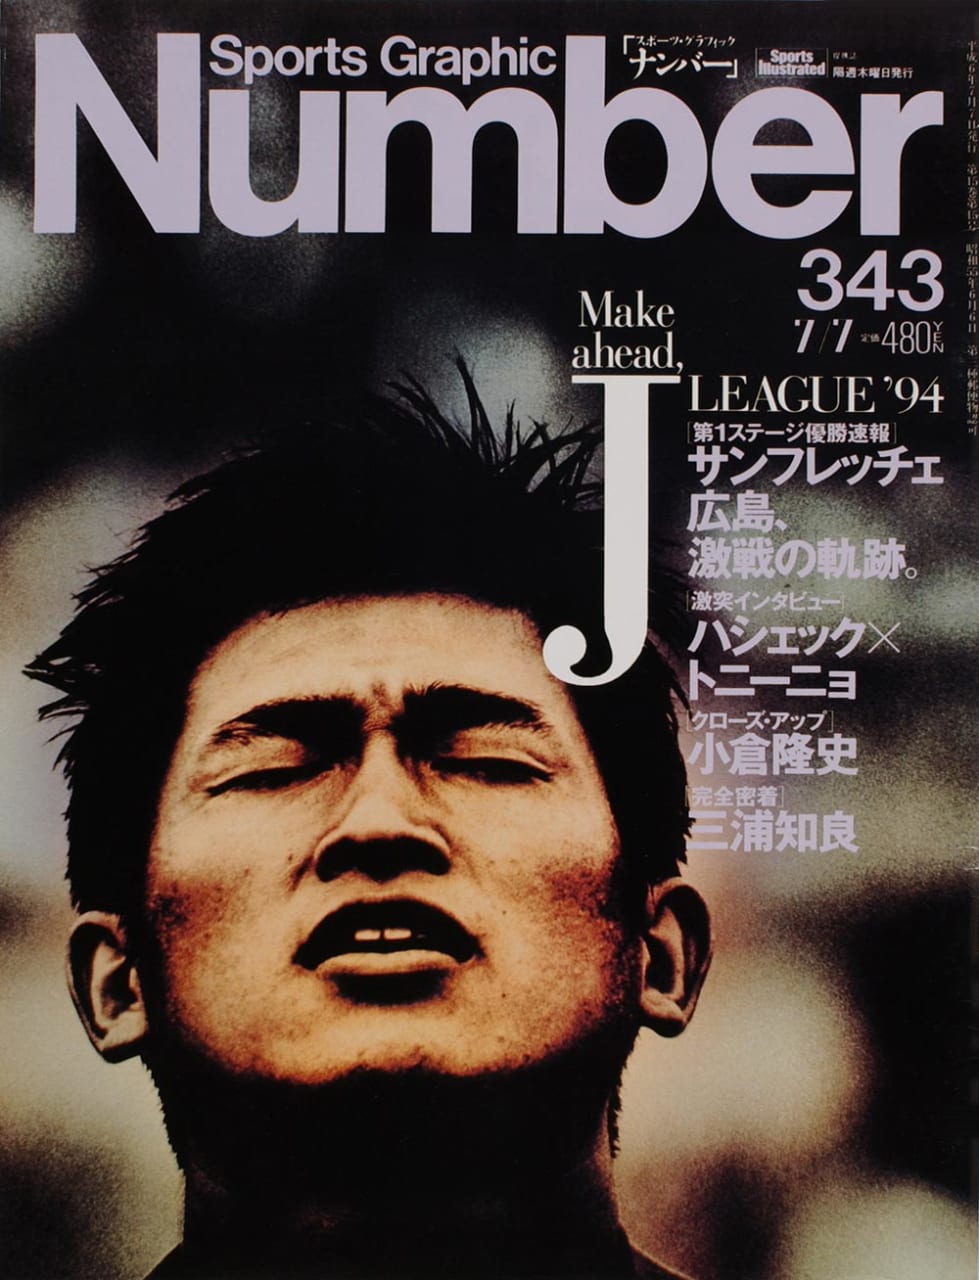 Sports Graphic Number 343号
1994年6月23日発売
表紙撮影：渞忠之